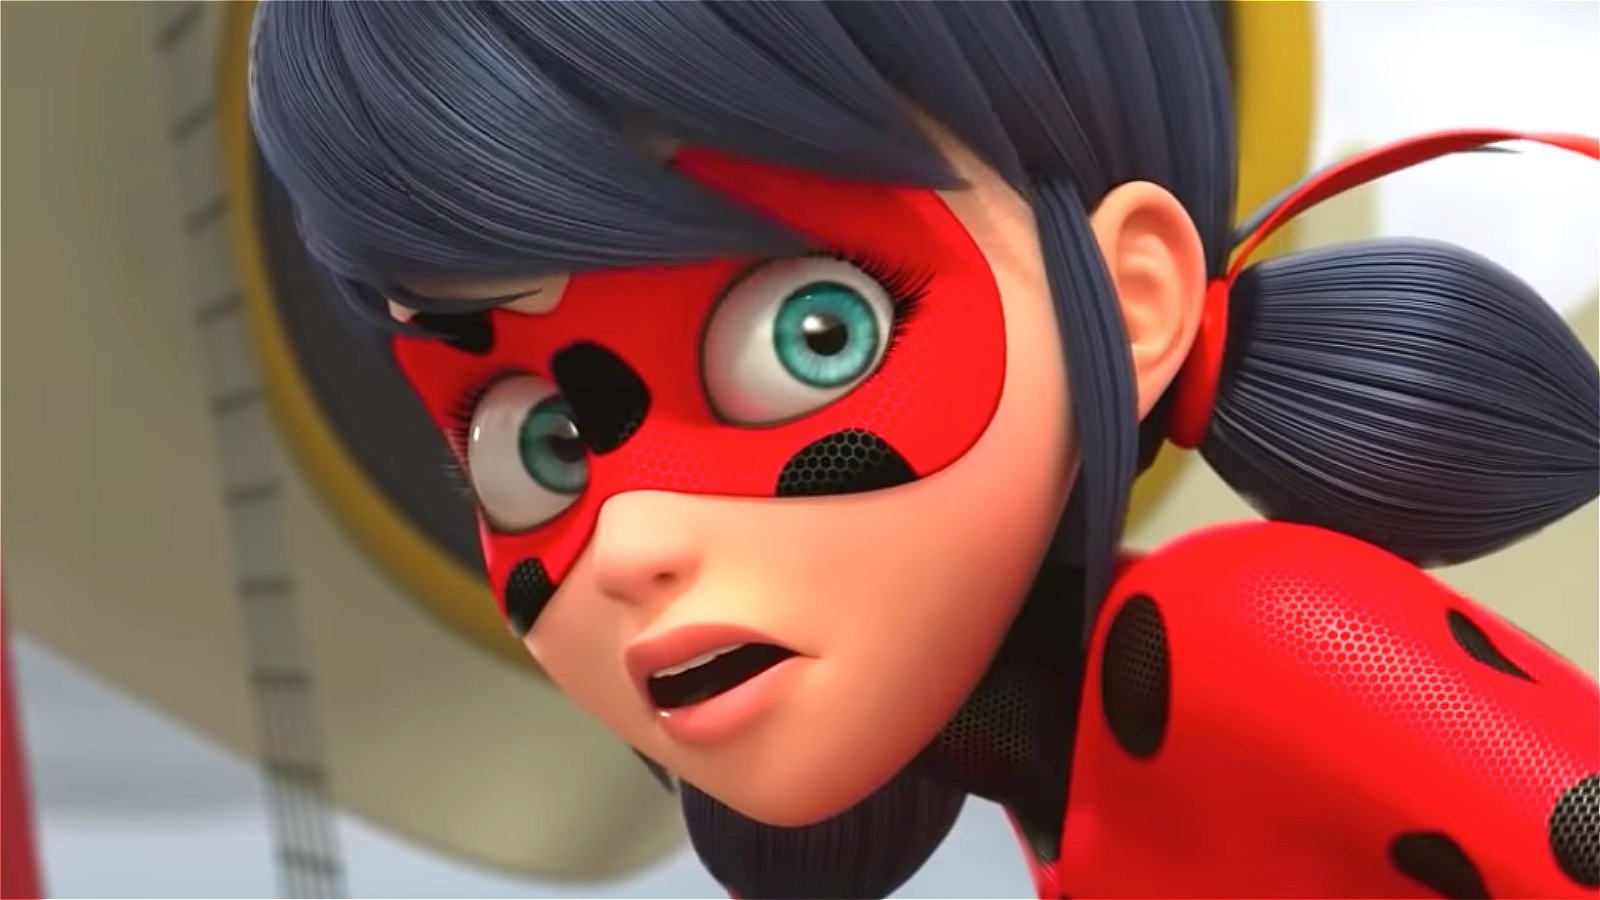 Miraculous: Tales of Ladybug & Cat Noir”: The French cartoon's rise to  global popularity